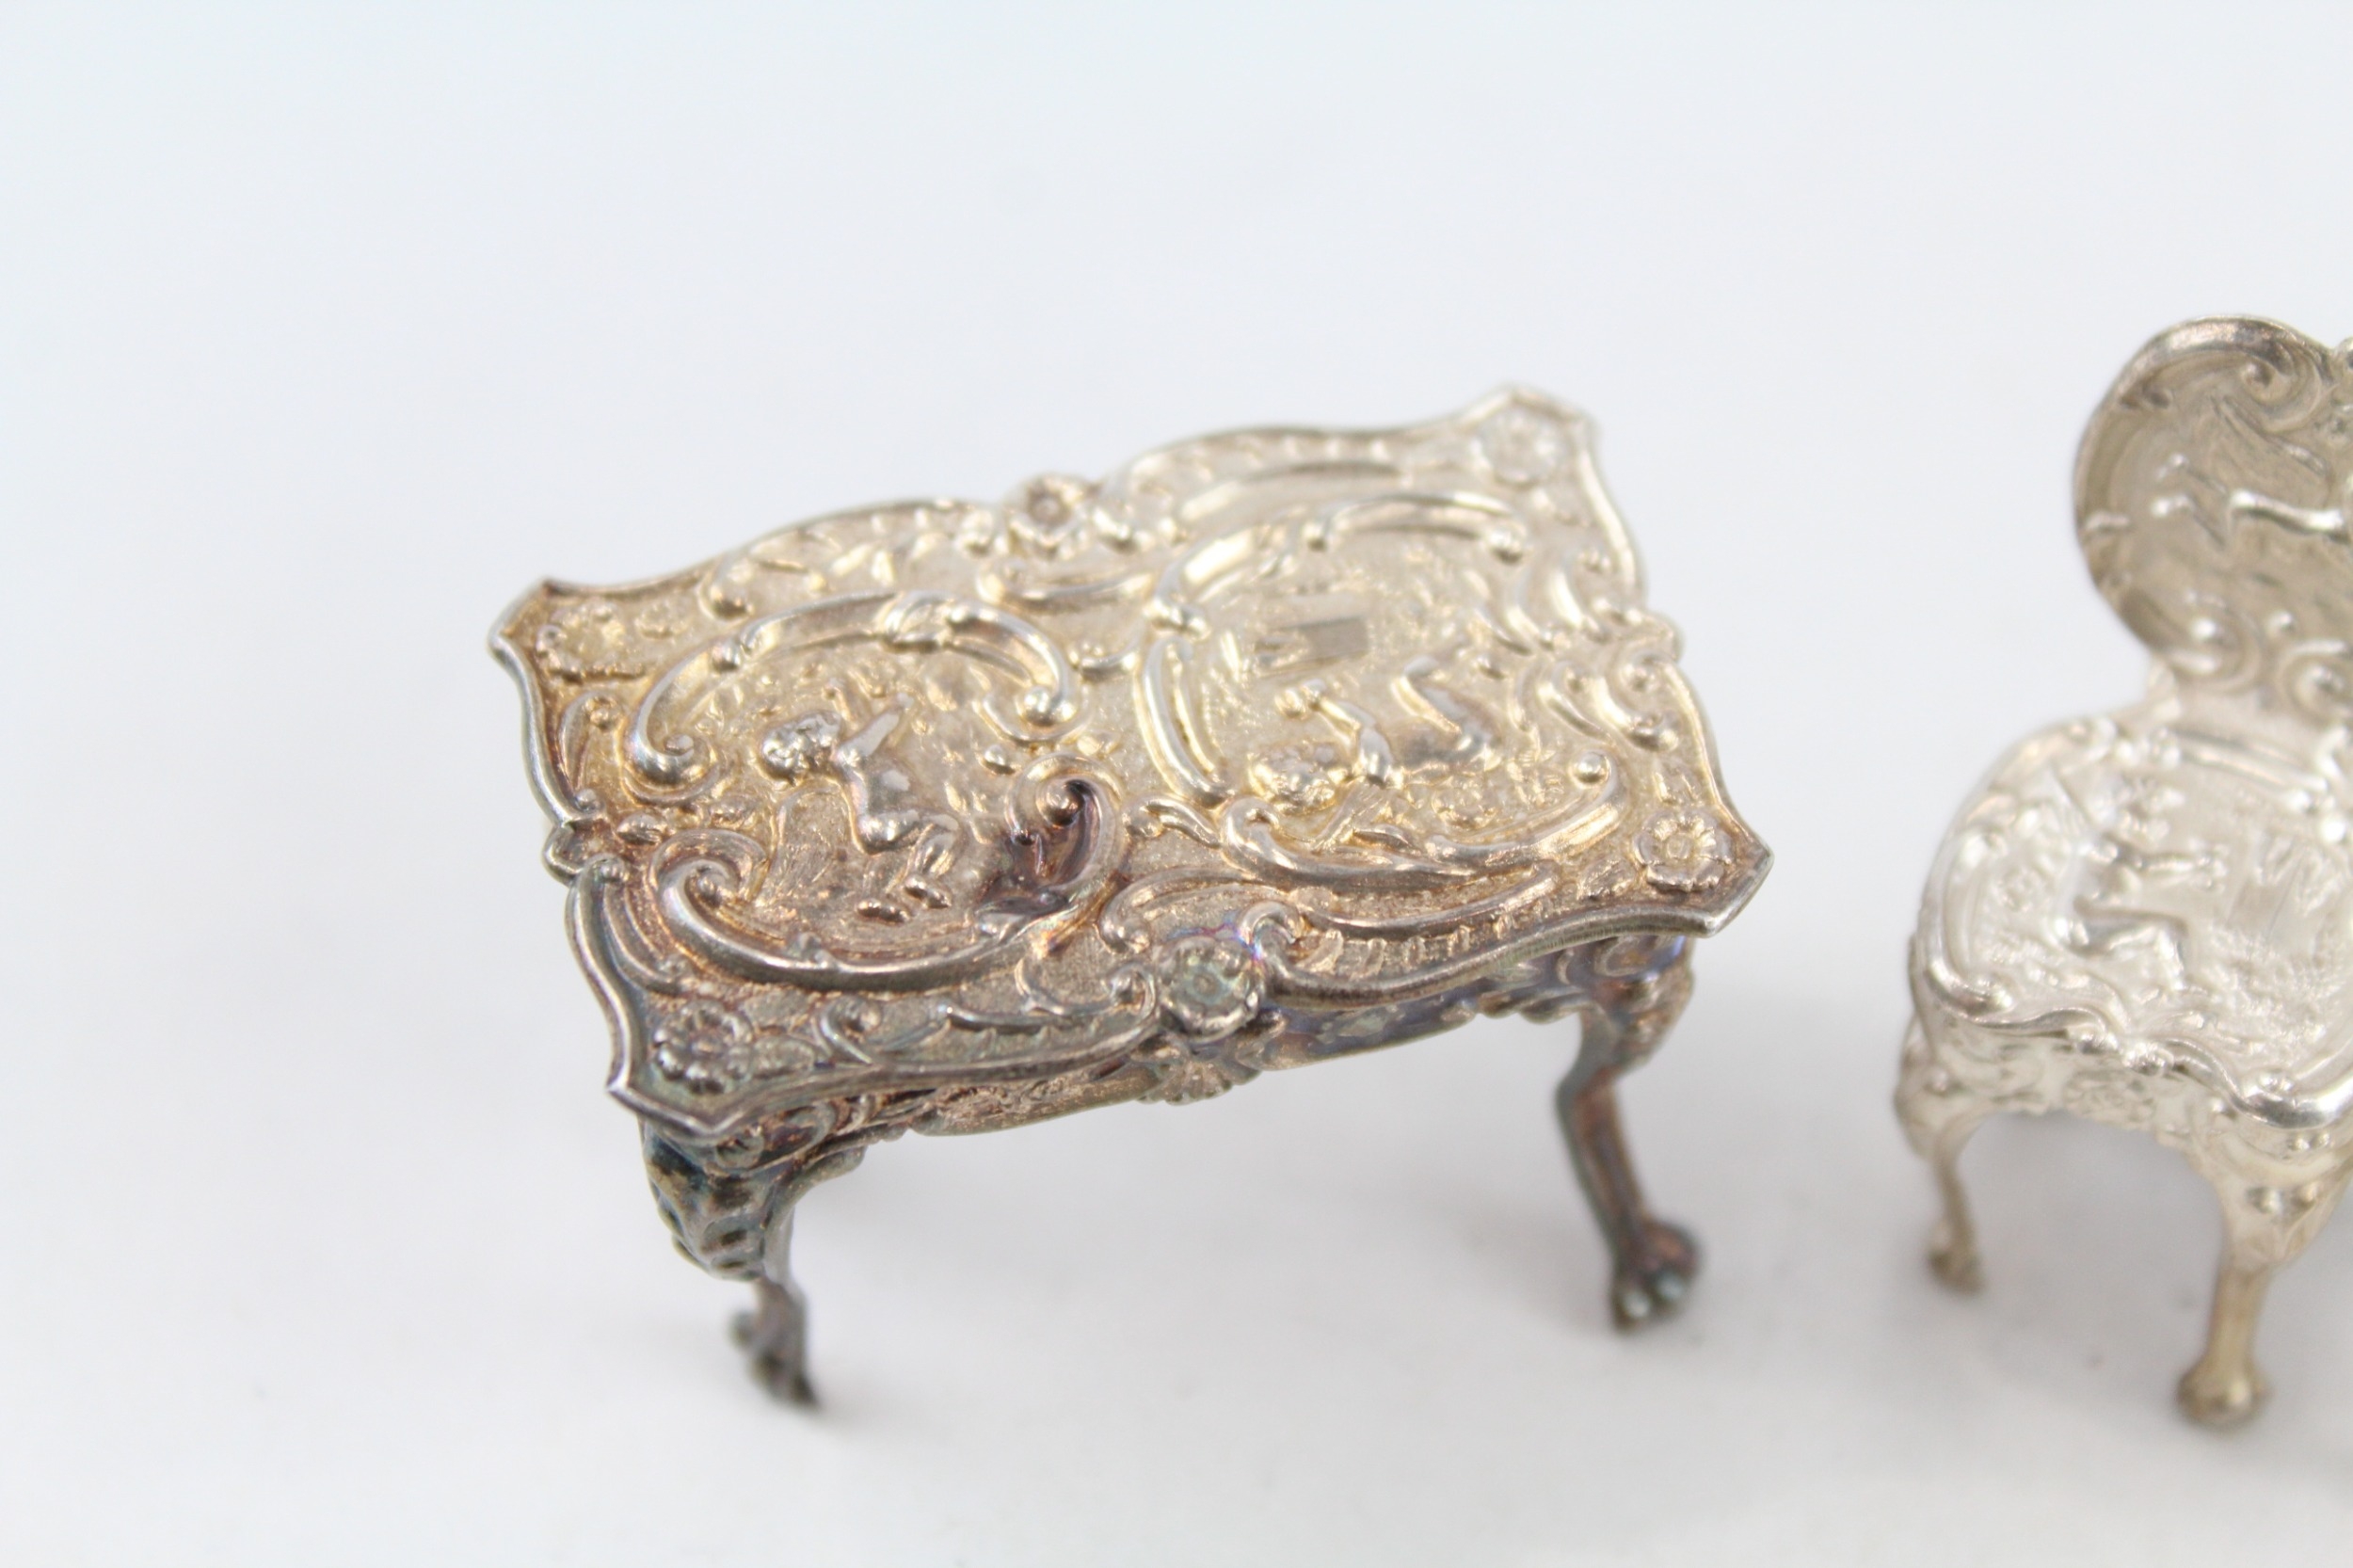 3 x Vintage .925 STERLING SILVER Doll's House Minature Table & Chairs (27g) - Image 2 of 4